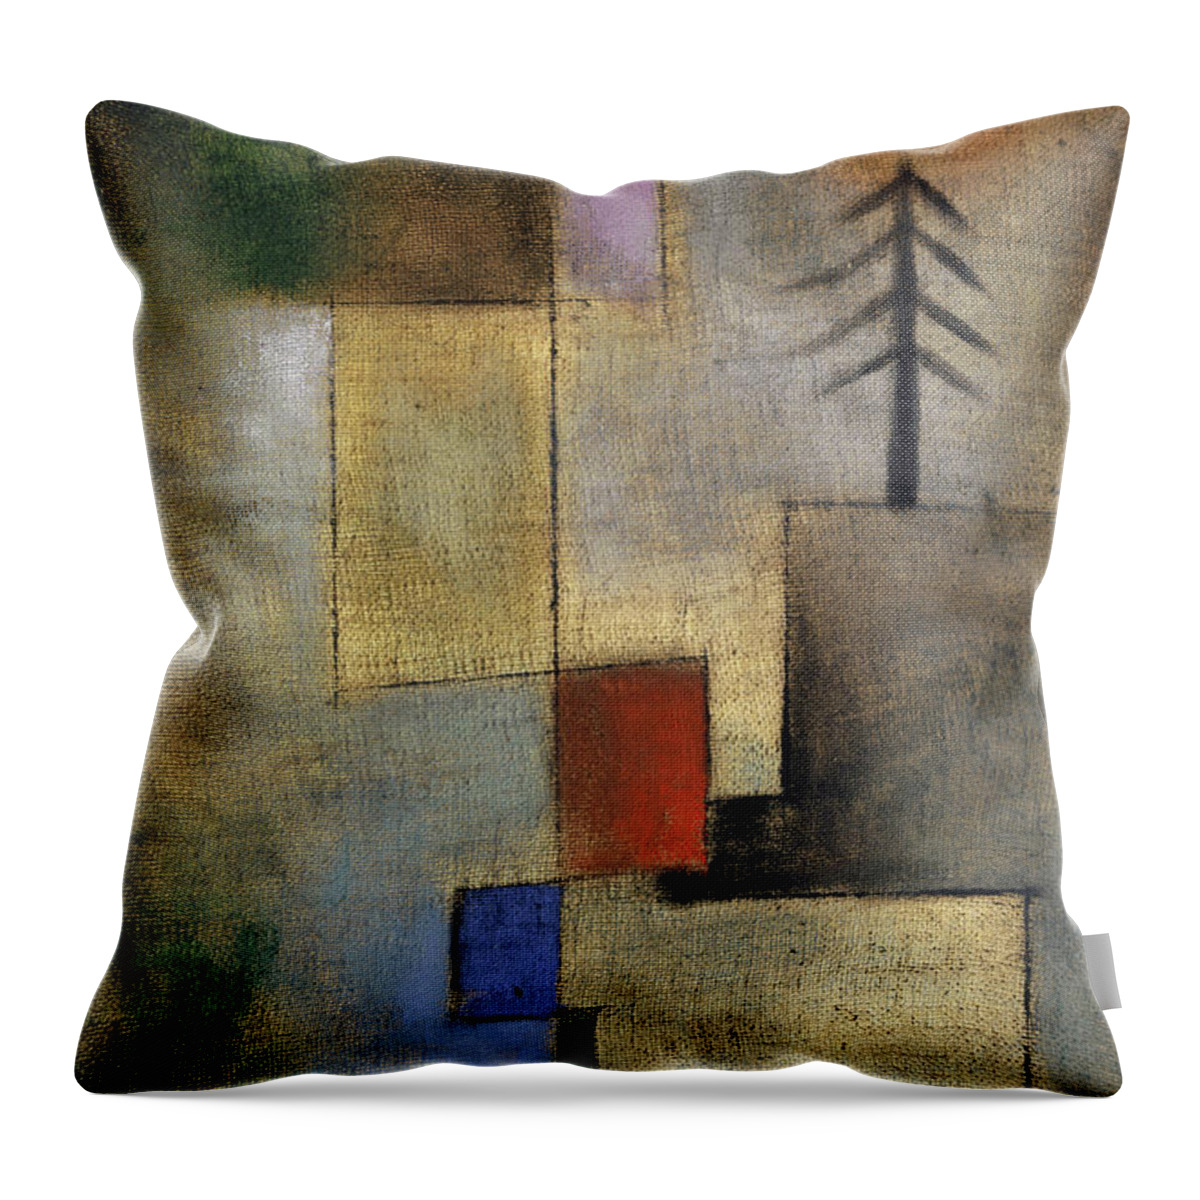 Paul Klee Throw Pillow featuring the painting Small Picture of Fir Trees, 1922 by Paul Klee